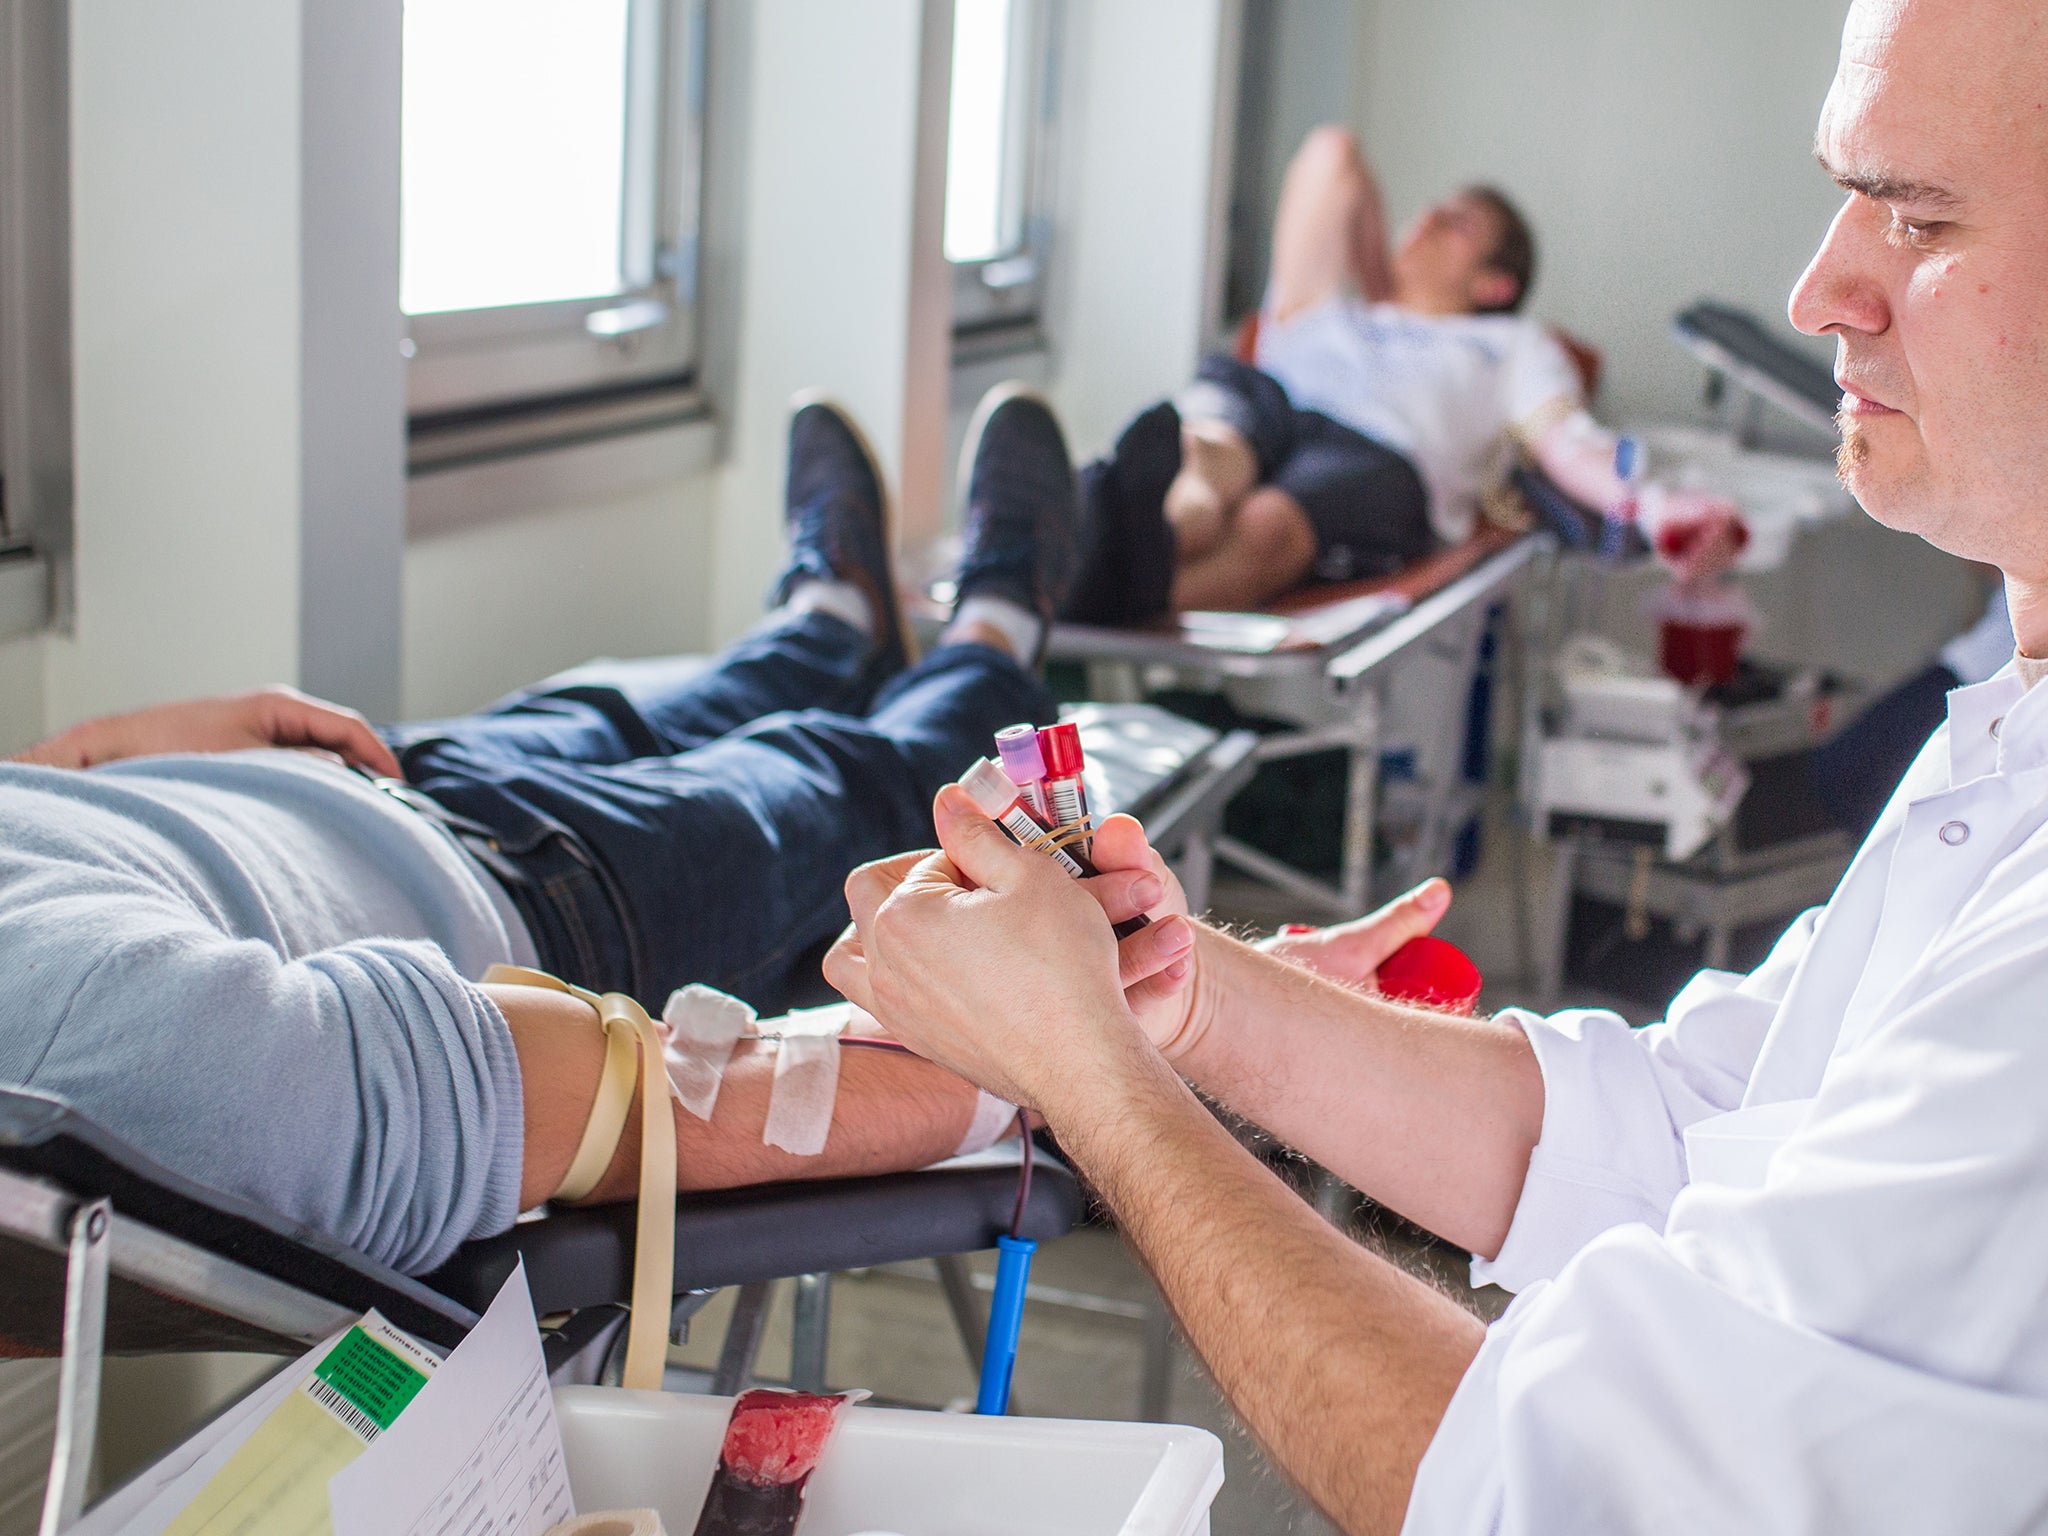 Currently there is a 3-month “celibacy” period required for gay men who want to give blood